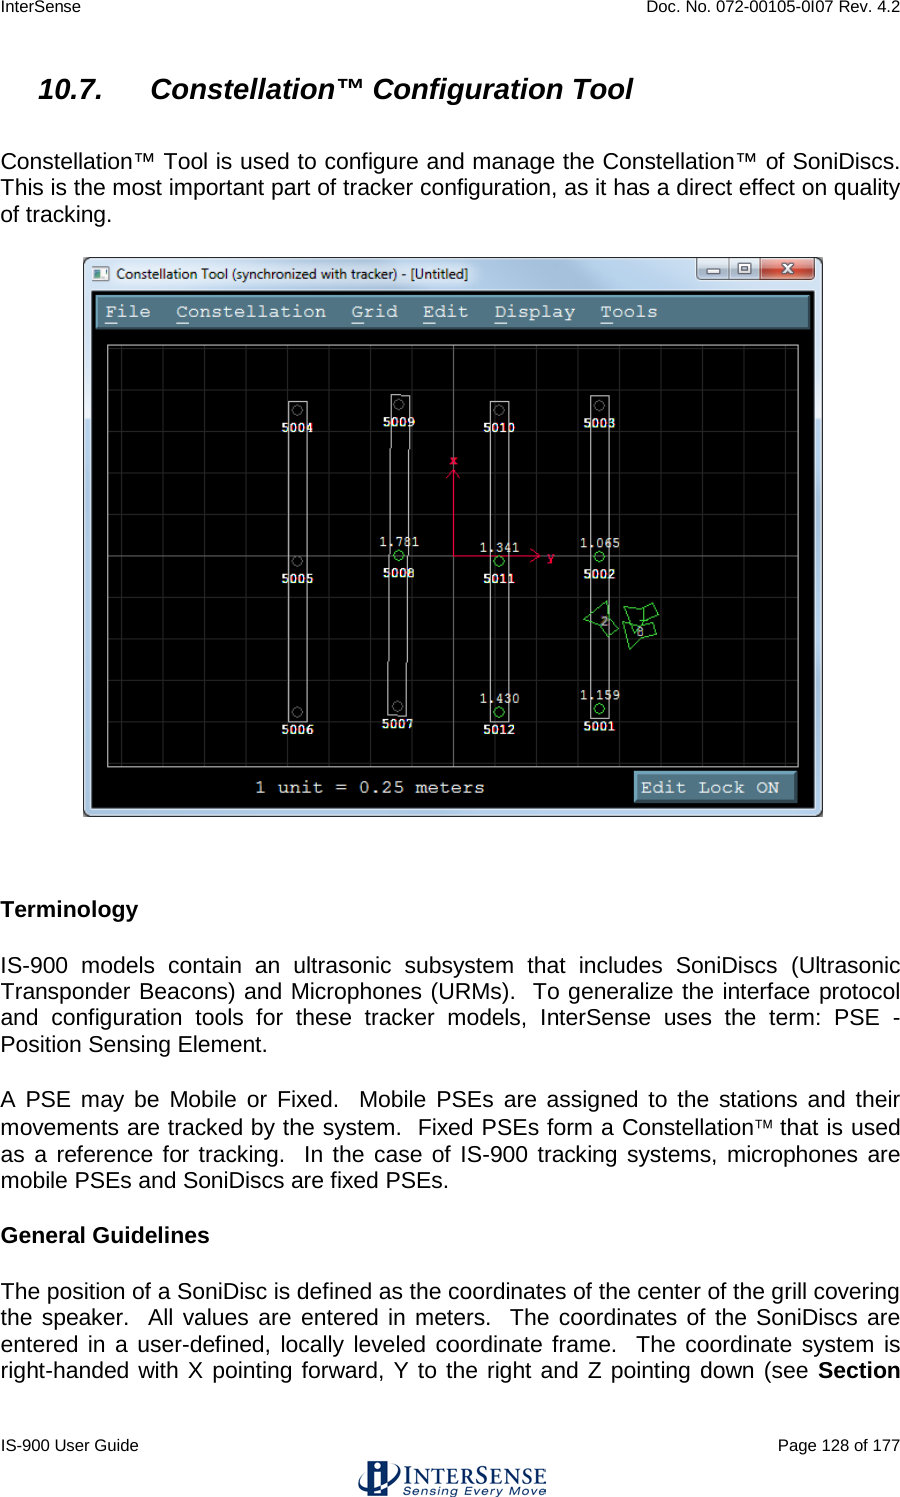 InterSense    Doc. No. 072-00105-0I07 Rev. 4.2 IS-900 User Guide                                                                                                                                          Page 128 of 177  10.7. Constellation™ Configuration Tool  Constellation™ Tool is used to configure and manage the Constellation™ of SoniDiscs.  This is the most important part of tracker configuration, as it has a direct effect on quality of tracking.   Terminology IS-900 models contain an ultrasonic subsystem that includes SoniDiscs (Ultrasonic Transponder Beacons) and Microphones (URMs).  To generalize the interface protocol and configuration tools for these tracker models, InterSense uses the term: PSE - Position Sensing Element. A PSE may be Mobile or Fixed.  Mobile PSEs are assigned to the stations and their movements are tracked by the system.  Fixed PSEs form a Constellation that is used as a reference for tracking.  In the case of IS-900 tracking systems, microphones are mobile PSEs and SoniDiscs are fixed PSEs. General Guidelines The position of a SoniDisc is defined as the coordinates of the center of the grill covering the speaker.  All values are entered in meters.  The coordinates of the SoniDiscs are entered in a user-defined, locally leveled coordinate frame.  The coordinate system is right-handed with X pointing forward, Y to the right and Z pointing down (see Section 